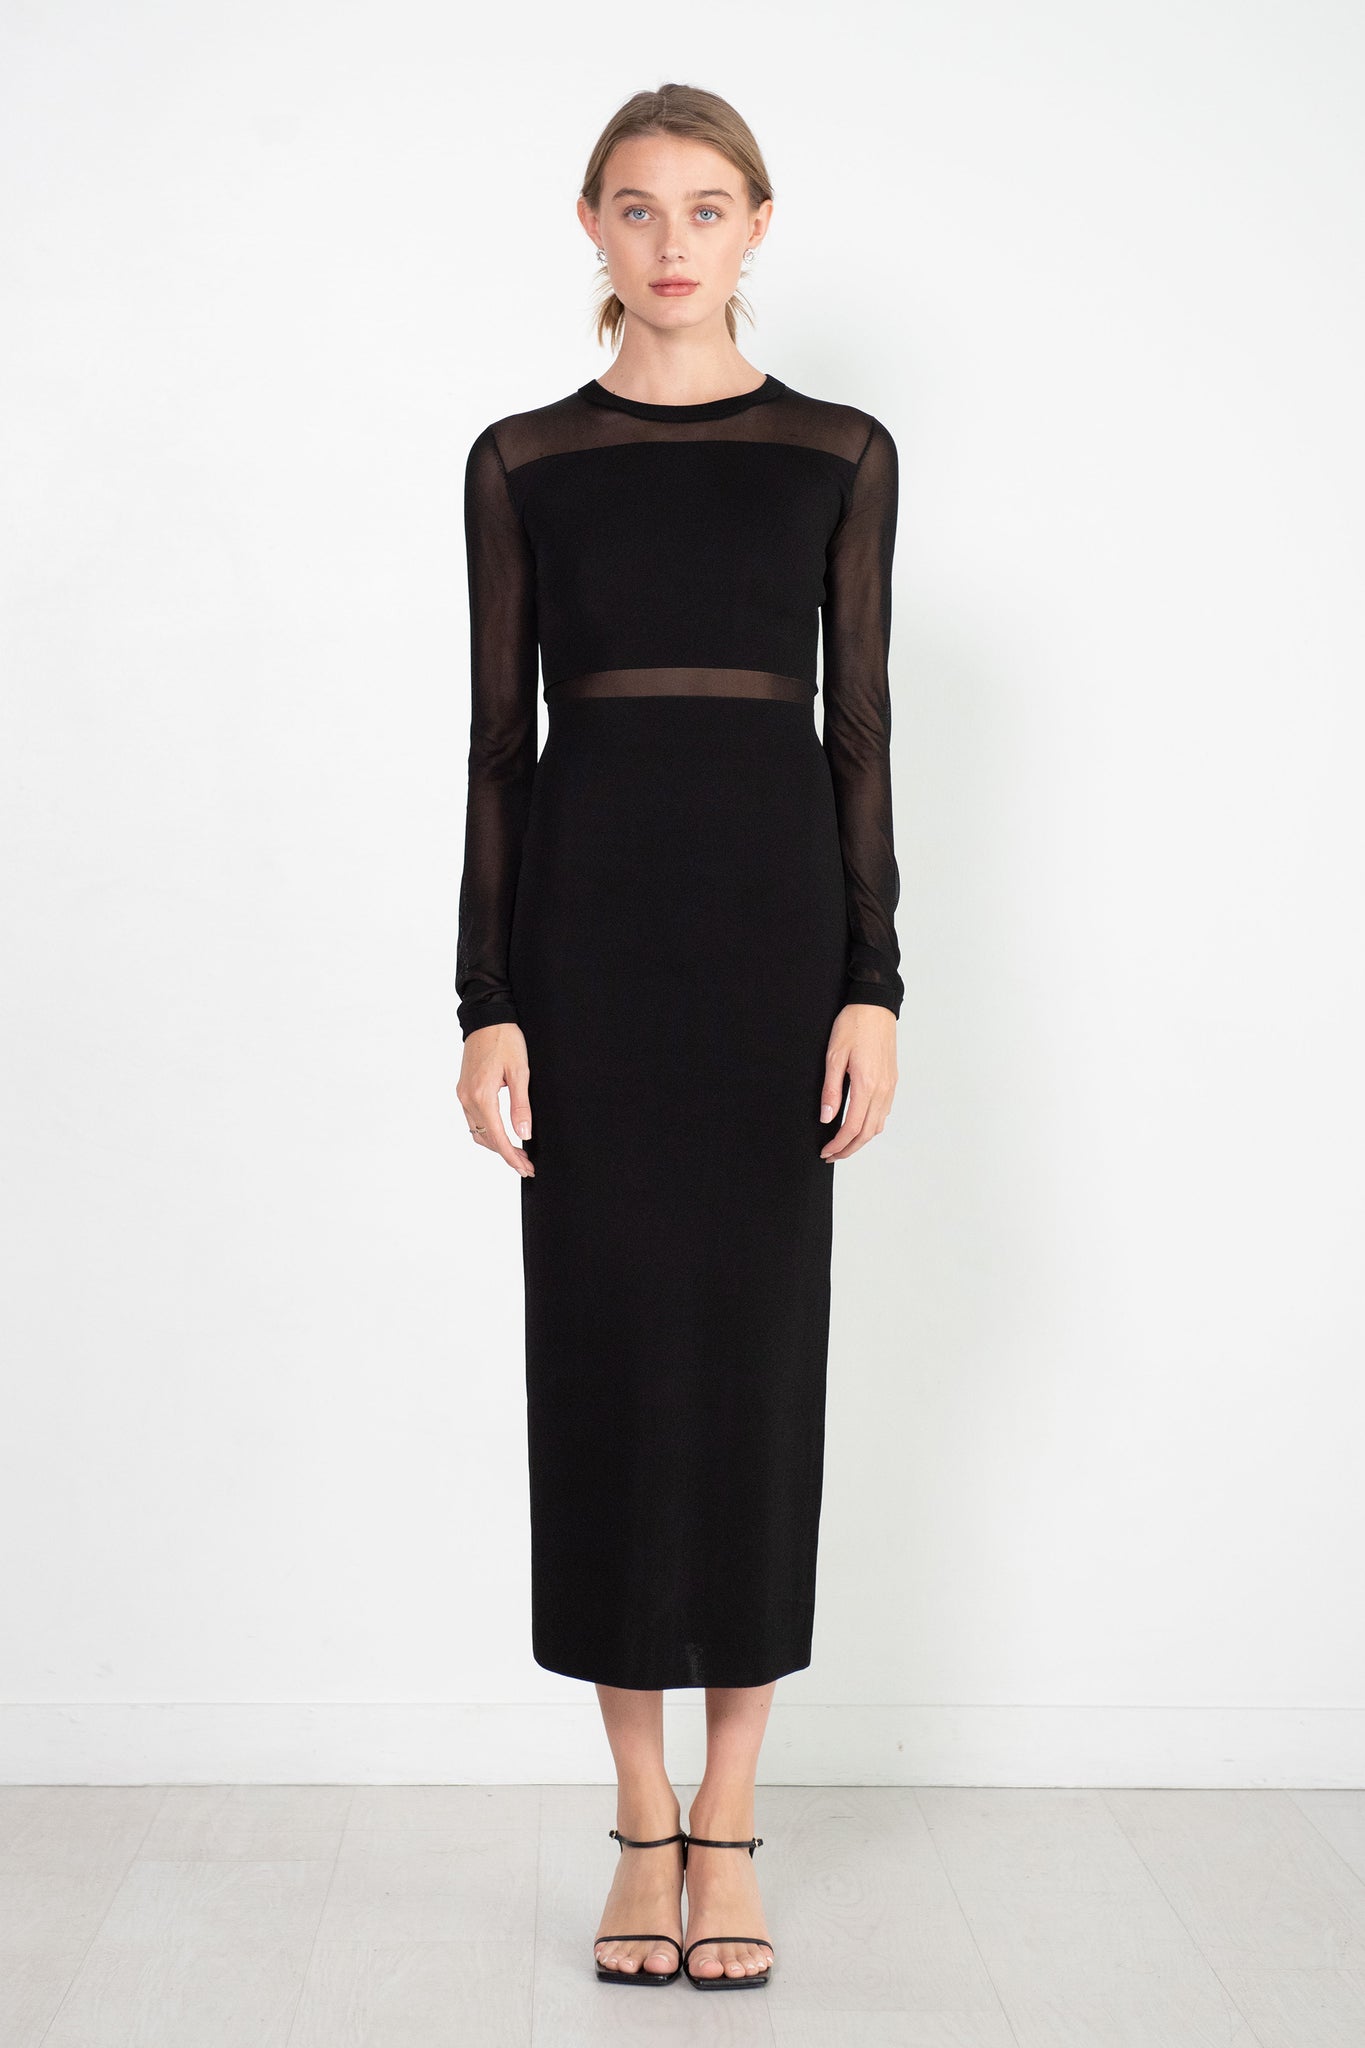 TOTEME - Semi-Sheer Knitted Cocktail Dress, Black